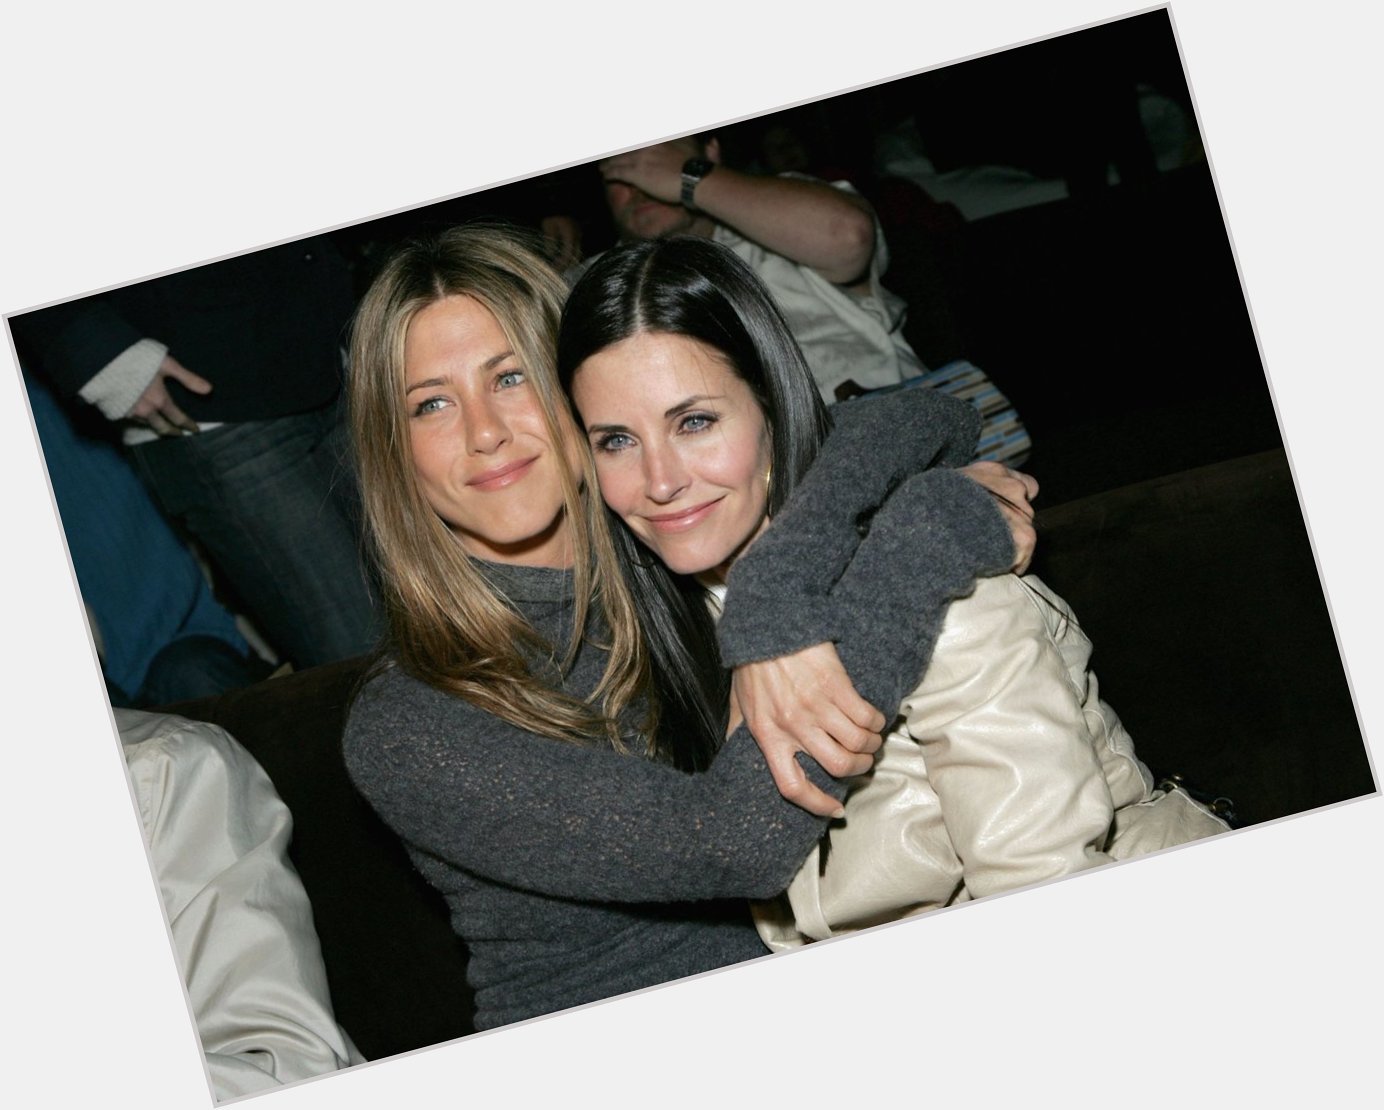 Happy Birthday to Courteney Cox!
Did you love watching her on Friends?  